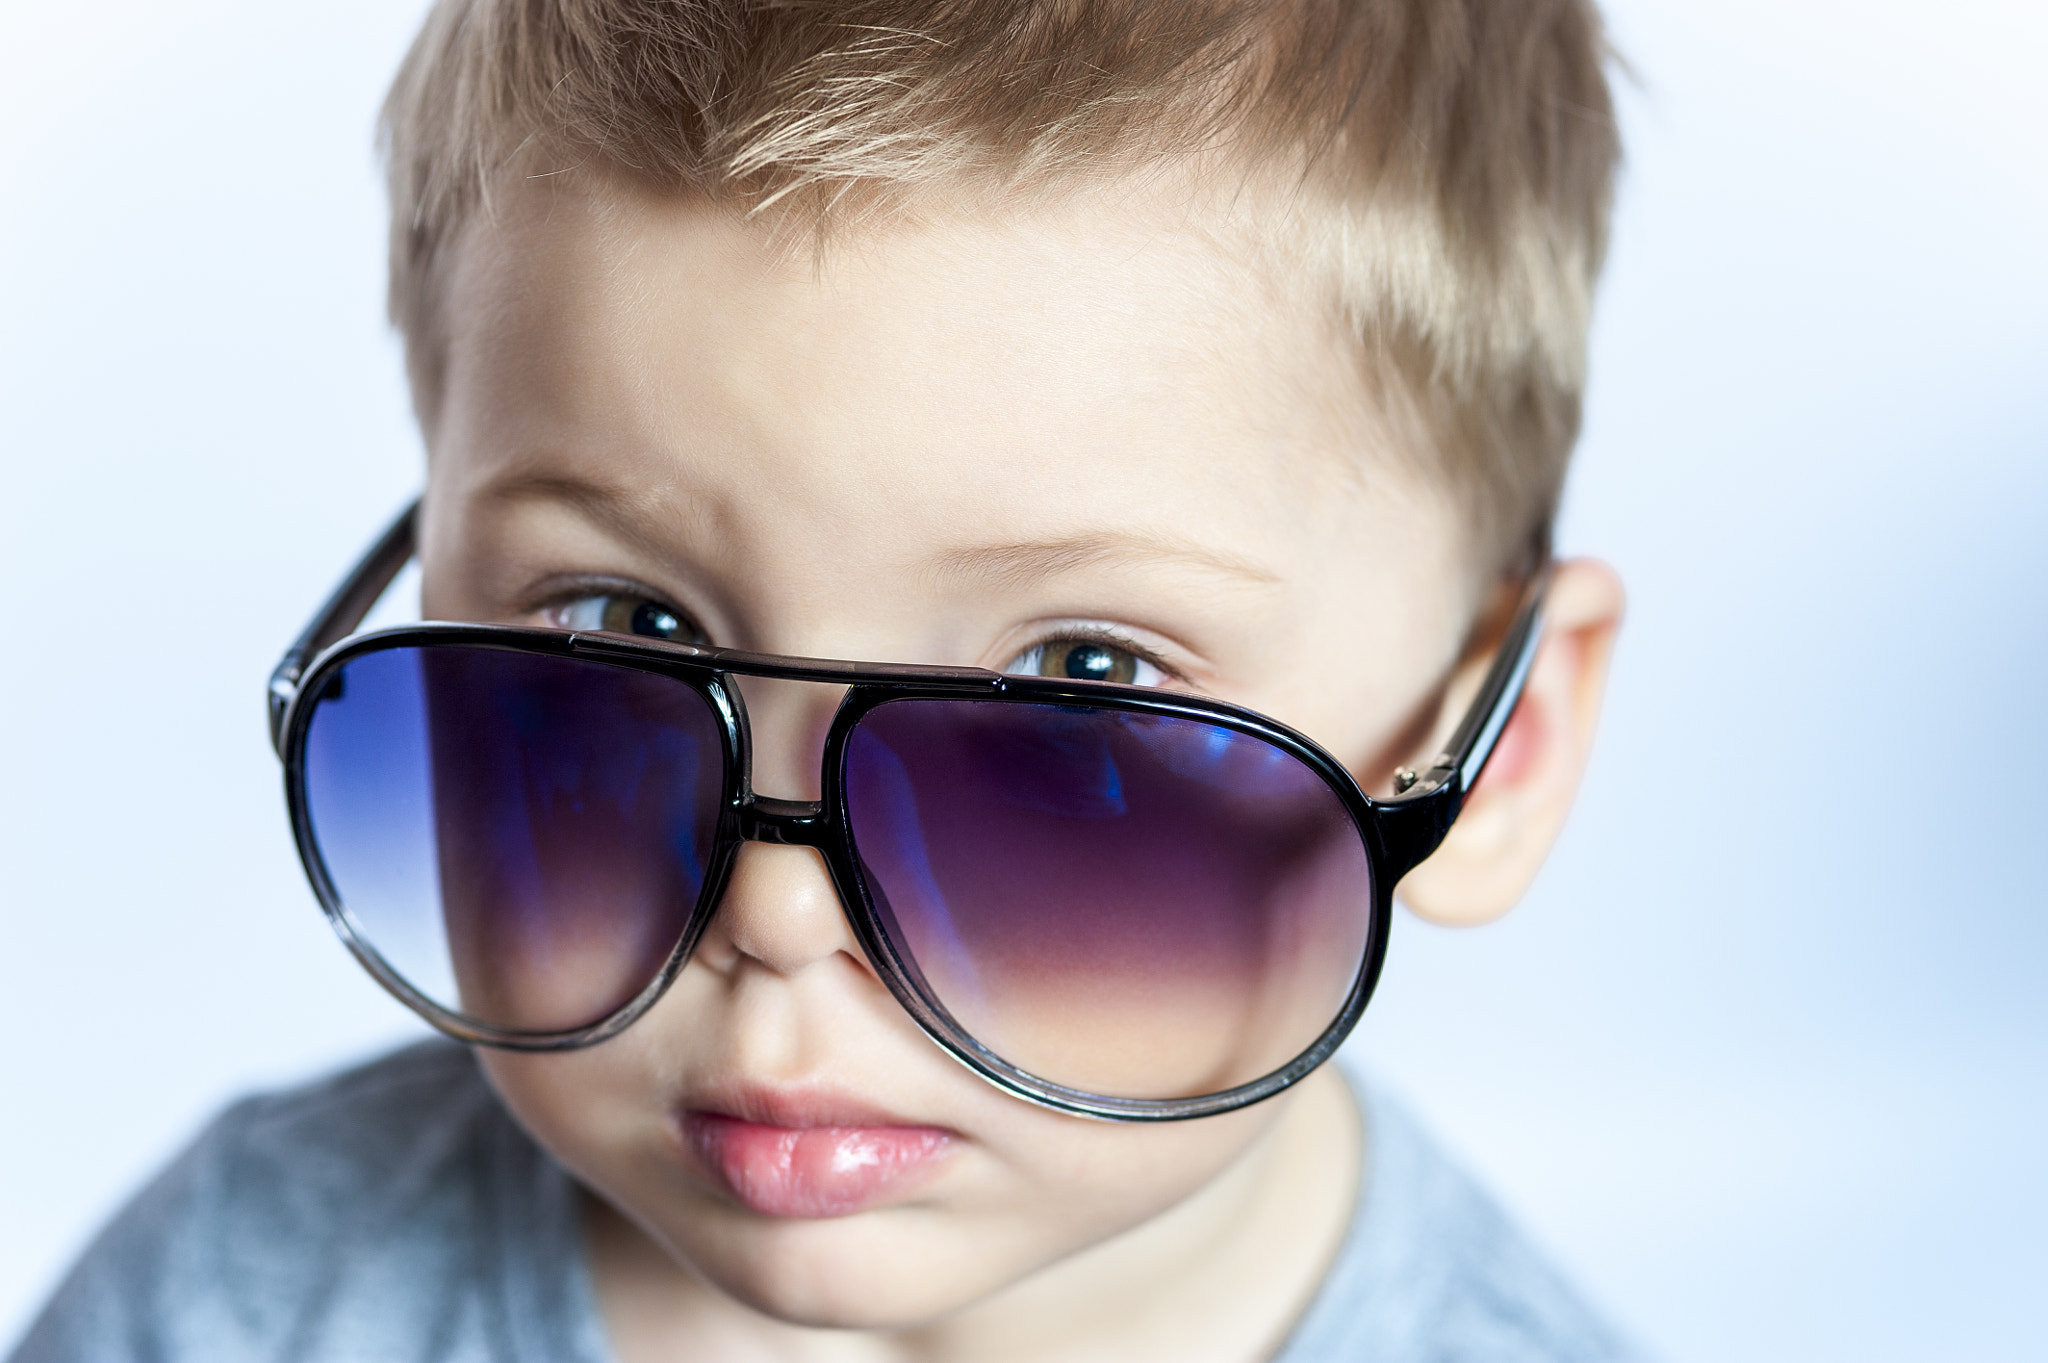 Nikon D700 + AF Micro-Nikkor 105mm f/2.8 sample photo. Charming three years old boy in sunglasses photography